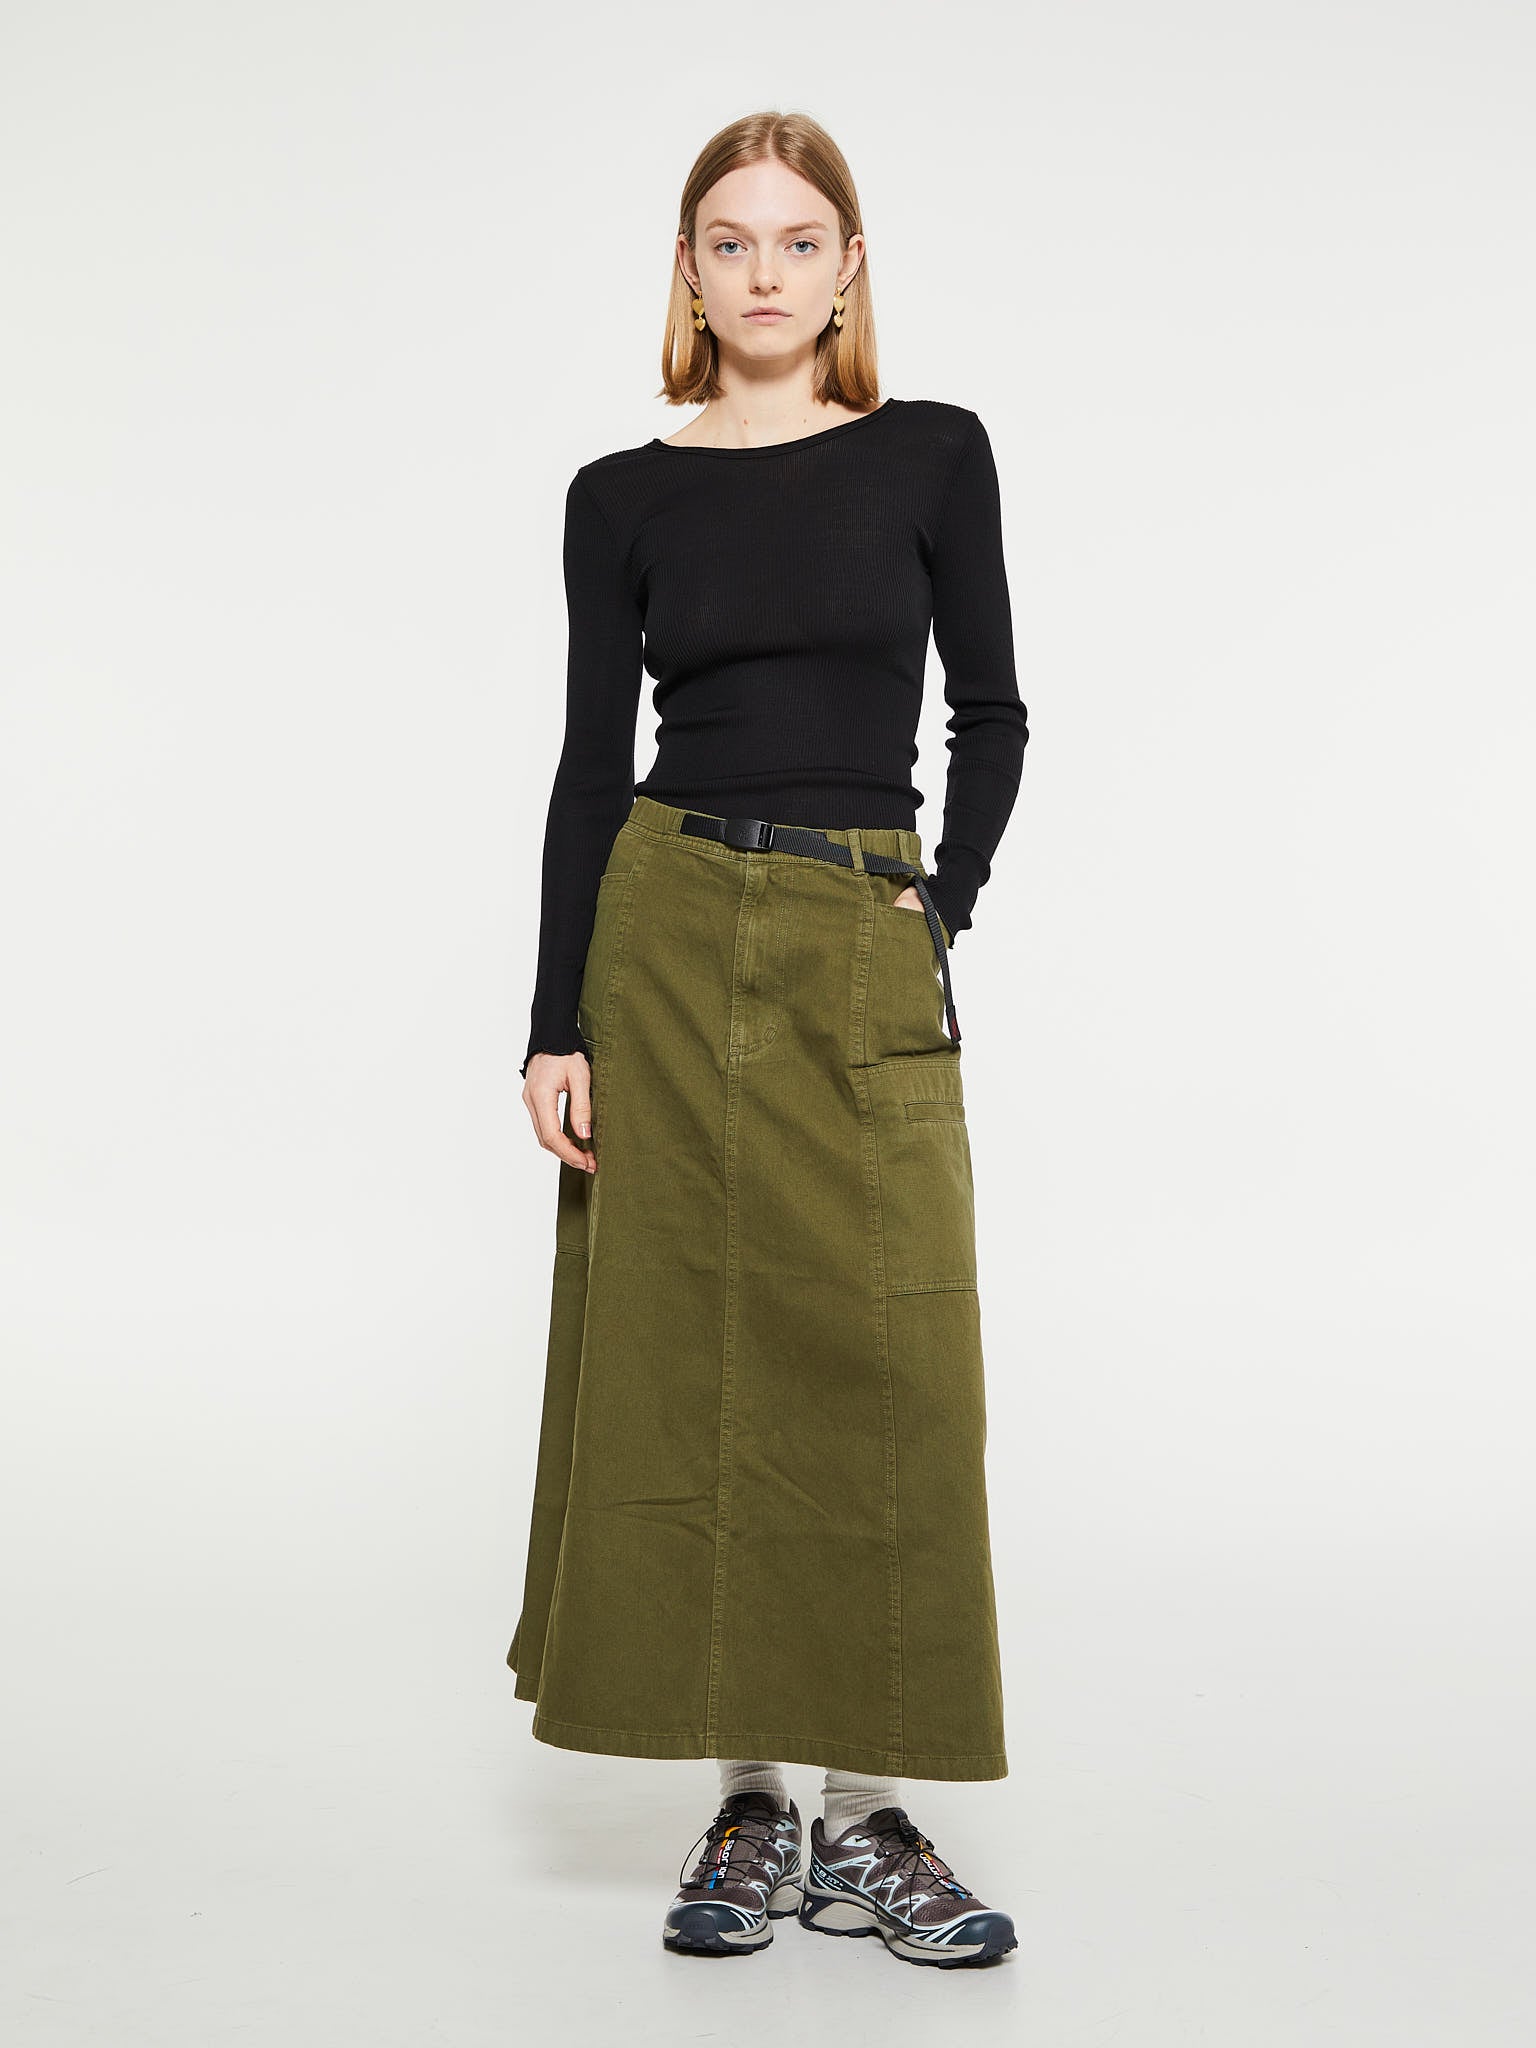 Gramicci - Voyager Skirt in Green